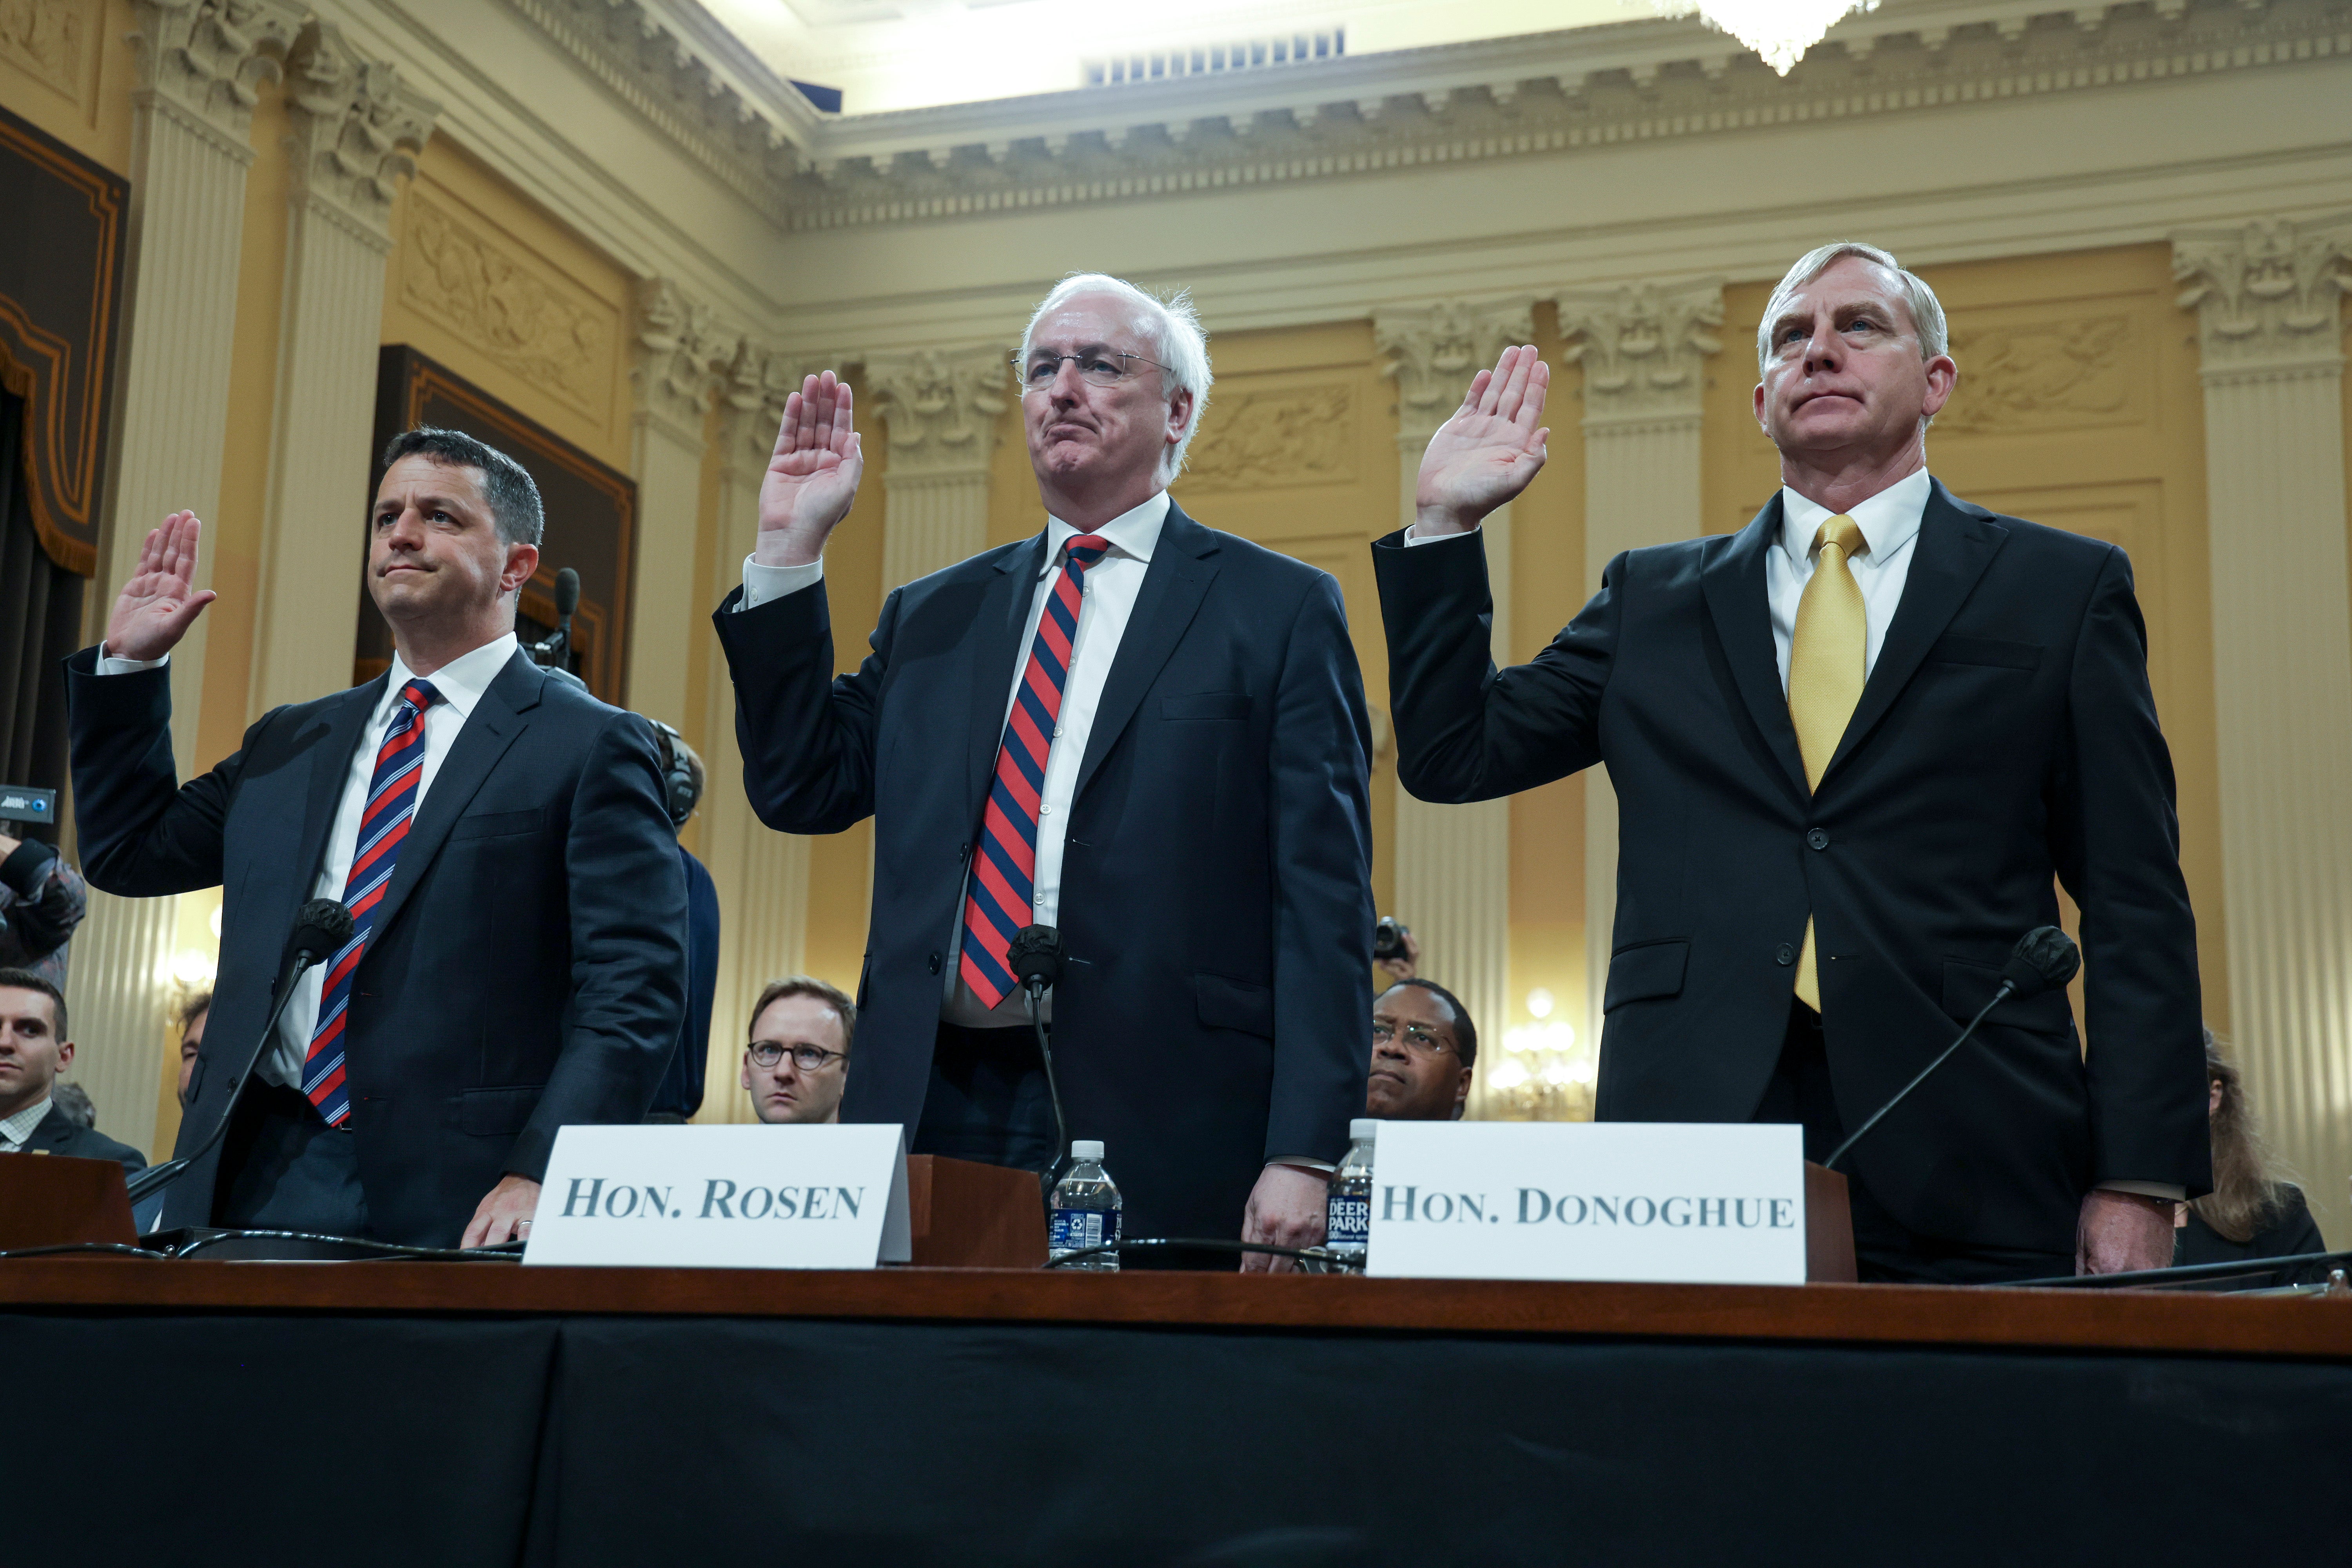 Steven Engel, former Assistant Attorney General for the Office of Legal Counsel, Jeffrey Rosen, former Acting Attorney General, and Richard Donoghue, former Acting Deputy Attorney General, are sworn-in